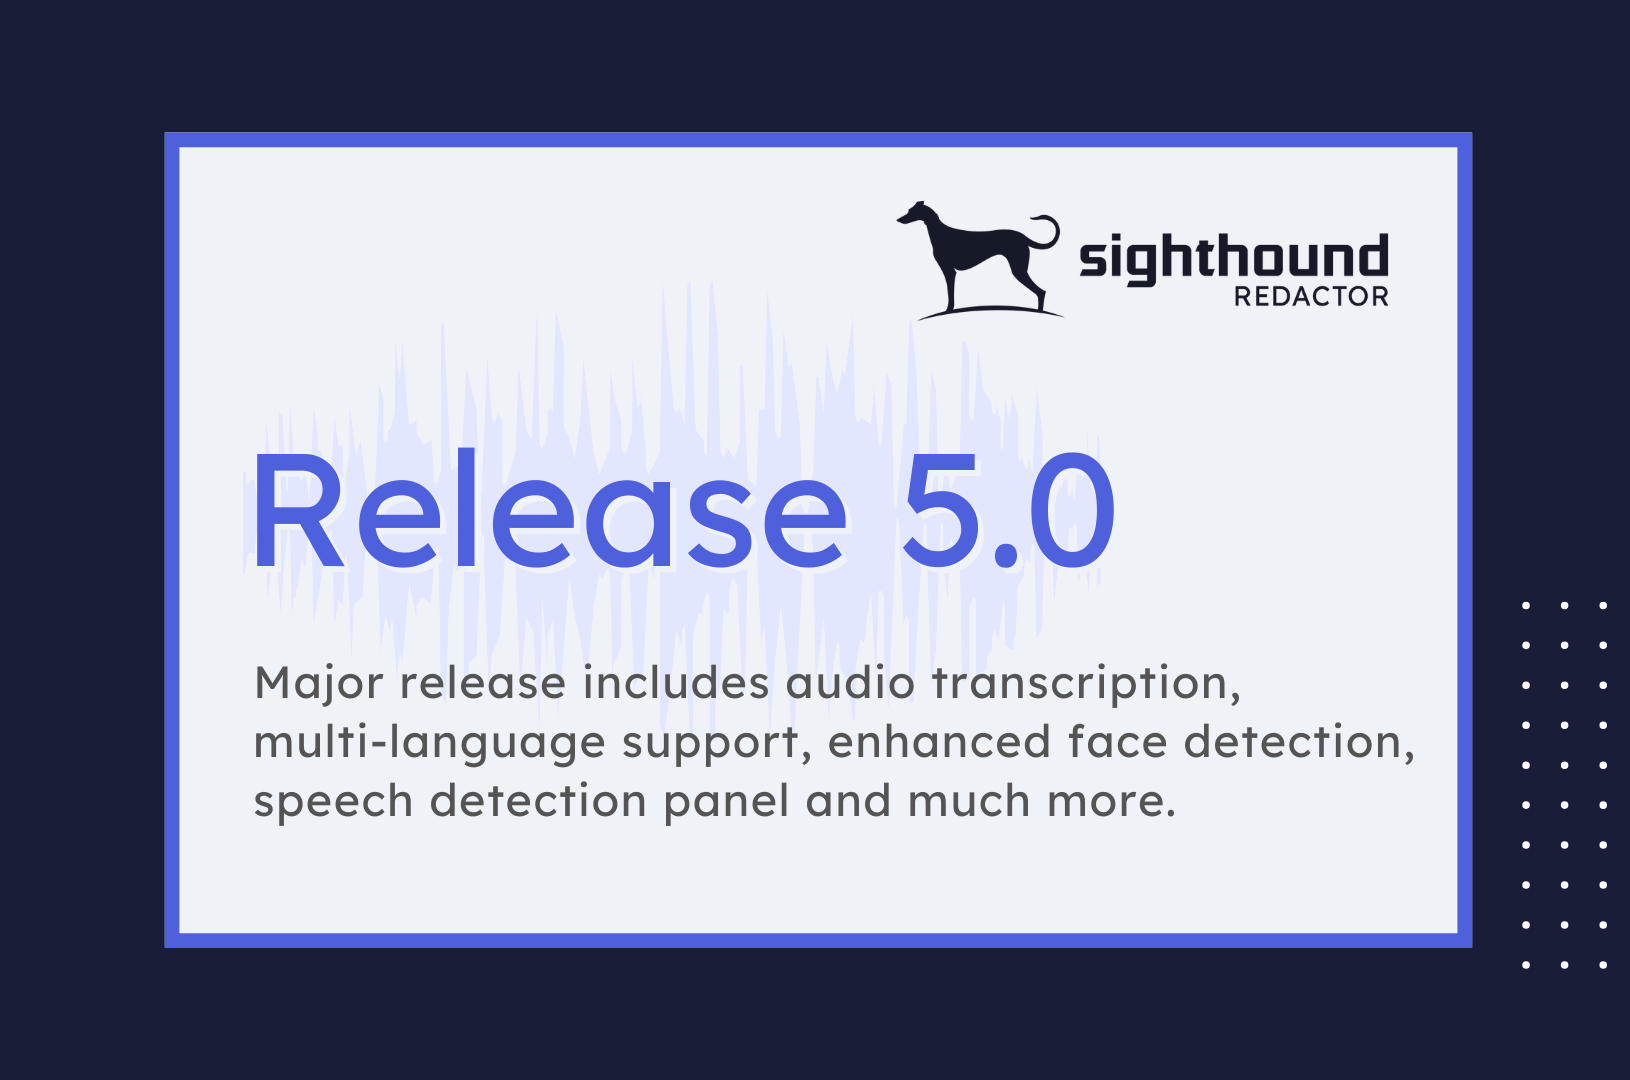 Major release includes audio transcription, multi-language support, enhanced face detection, speech detection panel and much more.